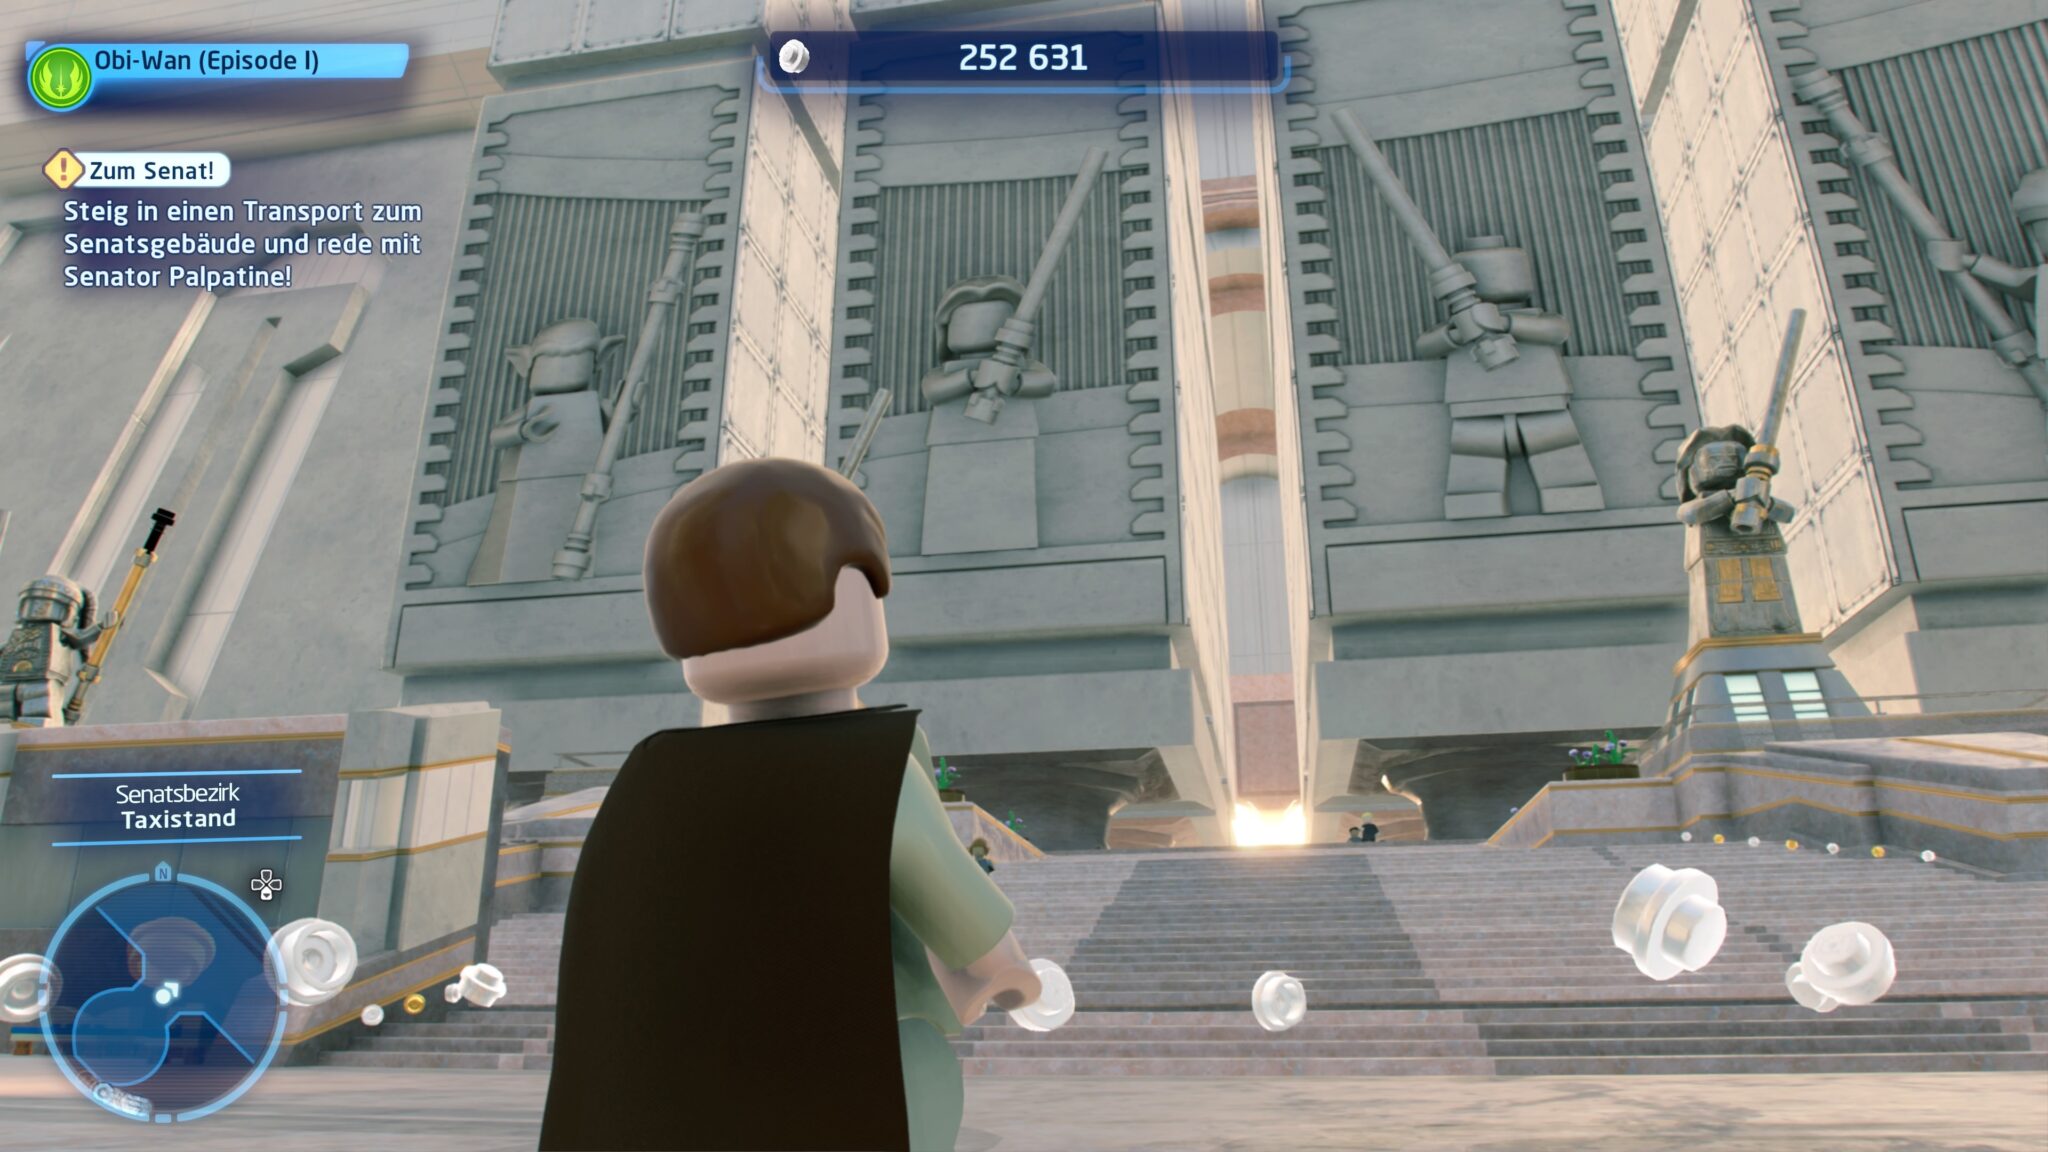 Even with Lego figures, the Jedi Temple looks truly awe-inspiring from the outside.